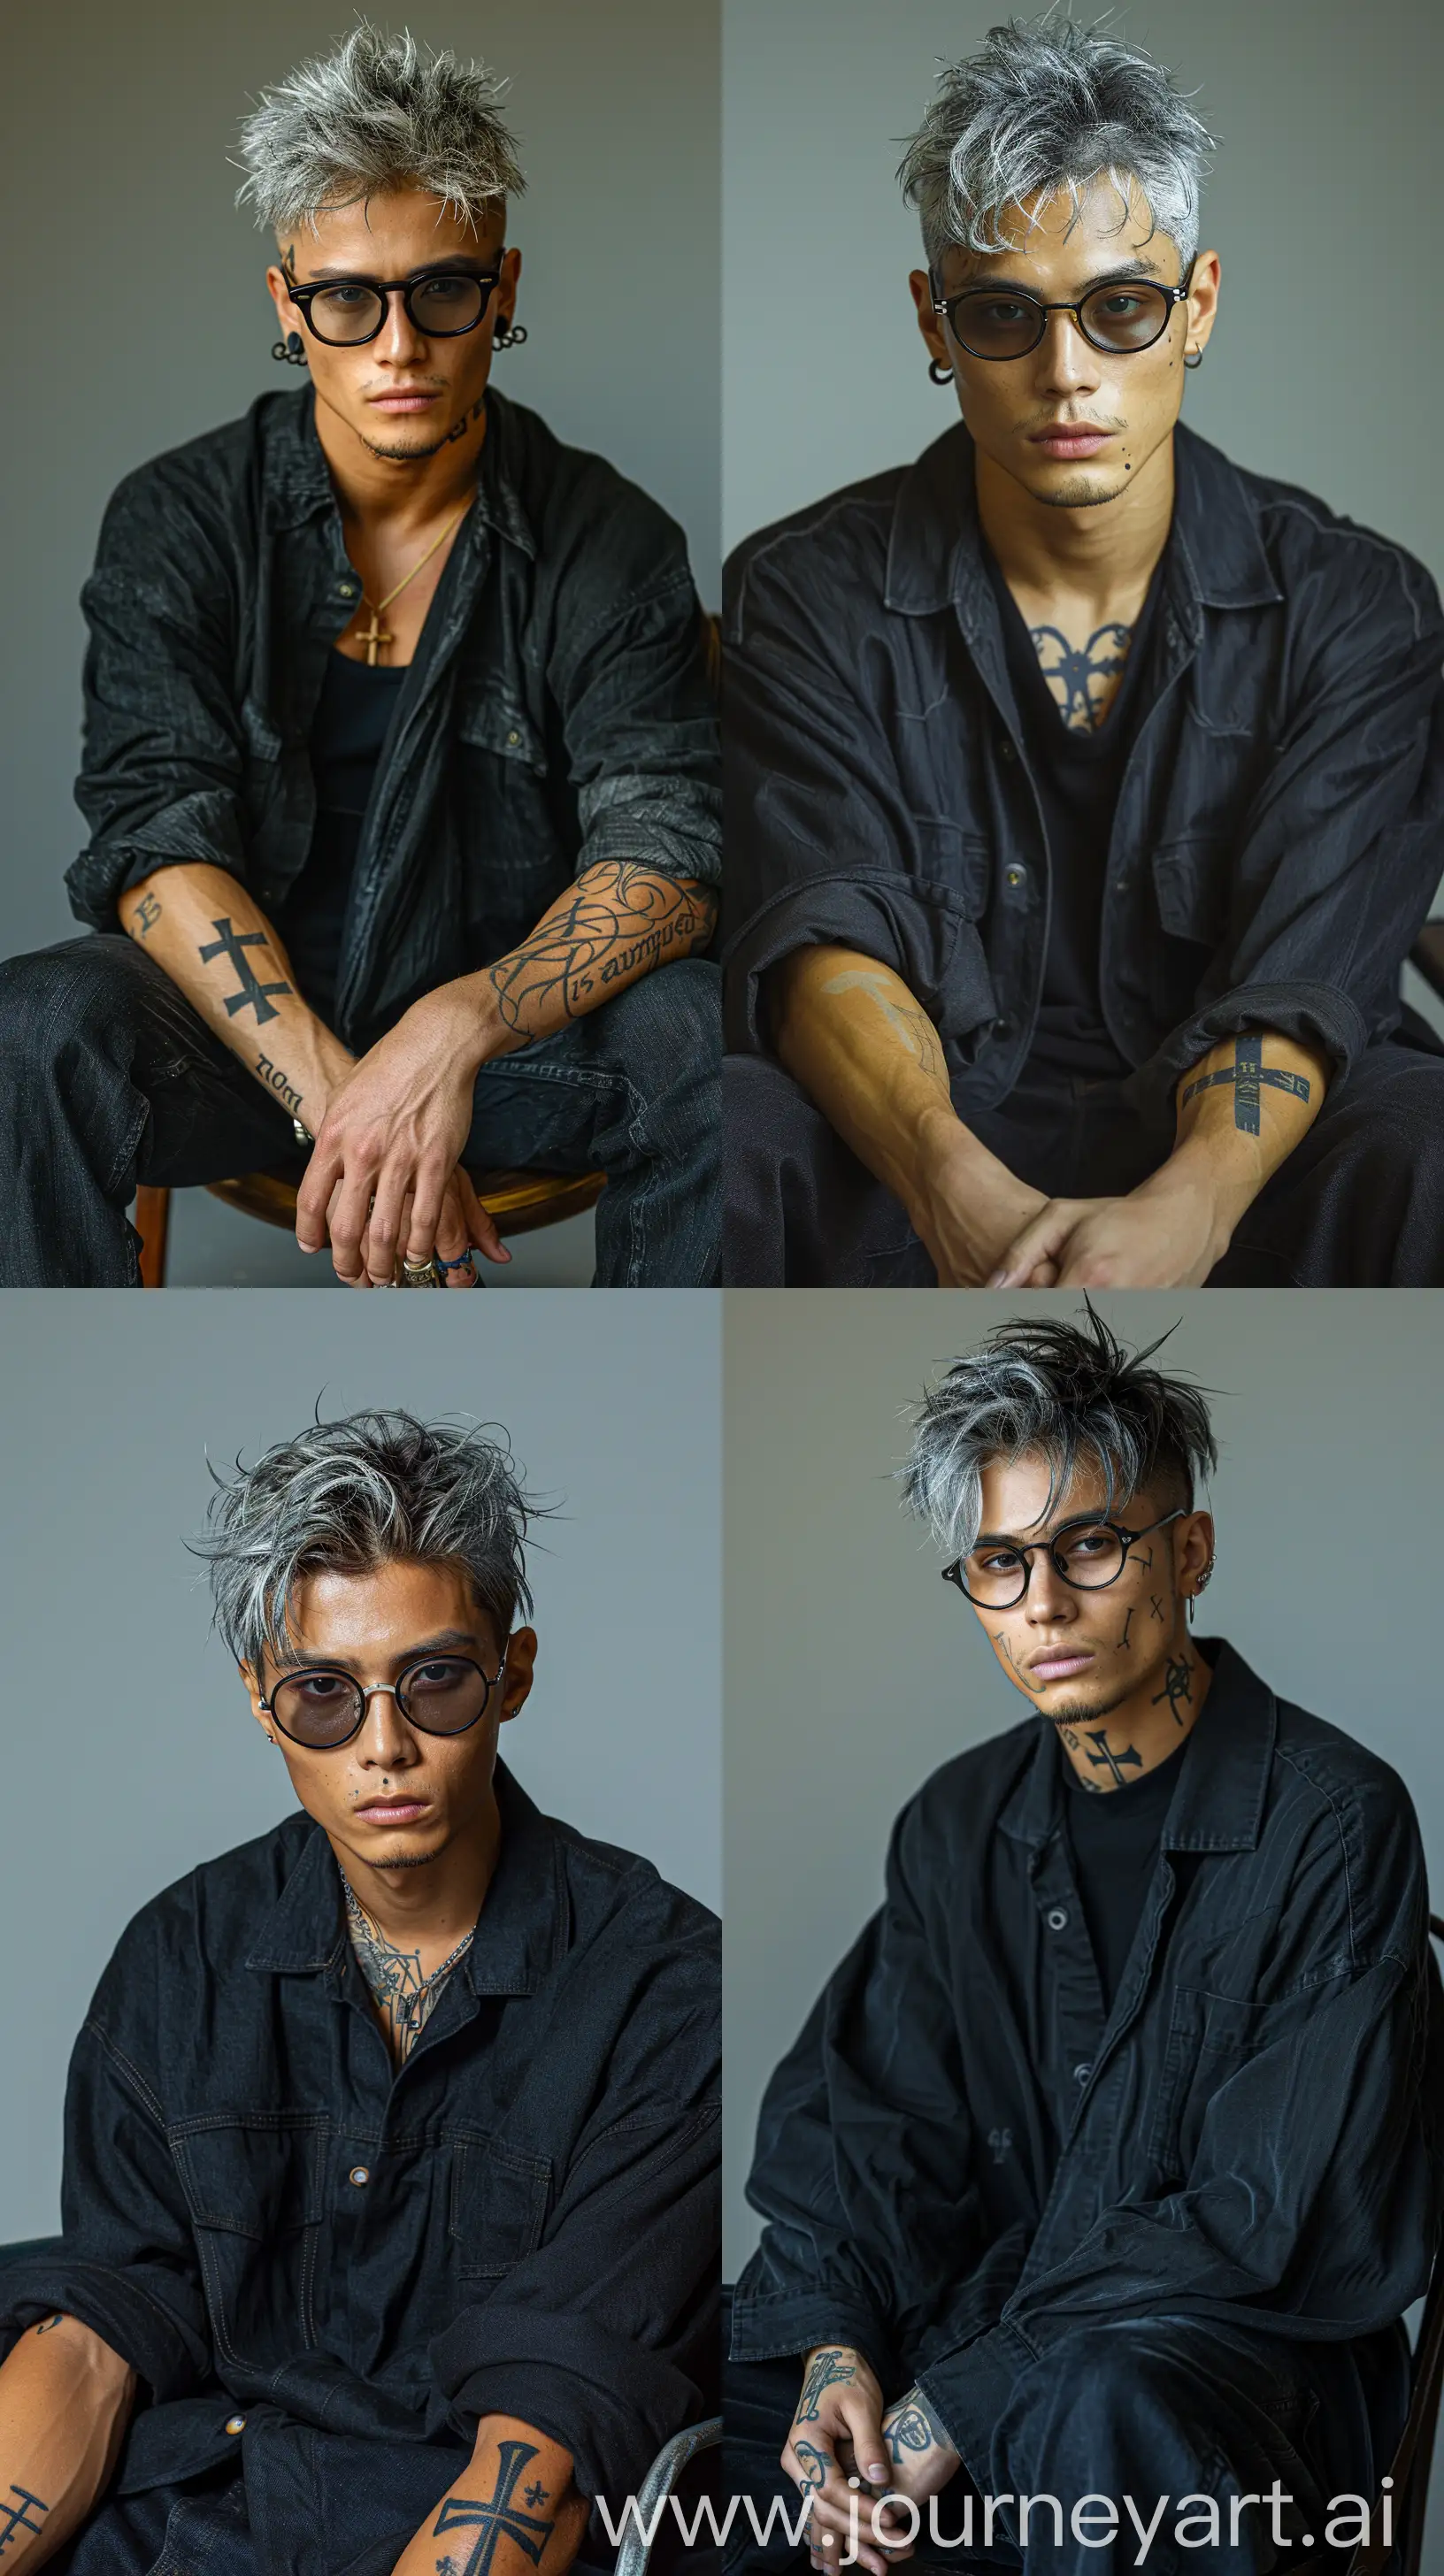 Confident-Male-Fashion-Model-with-Silver-Undercut-Hairstyle-and-Gothic-Tattooed-Sleeves